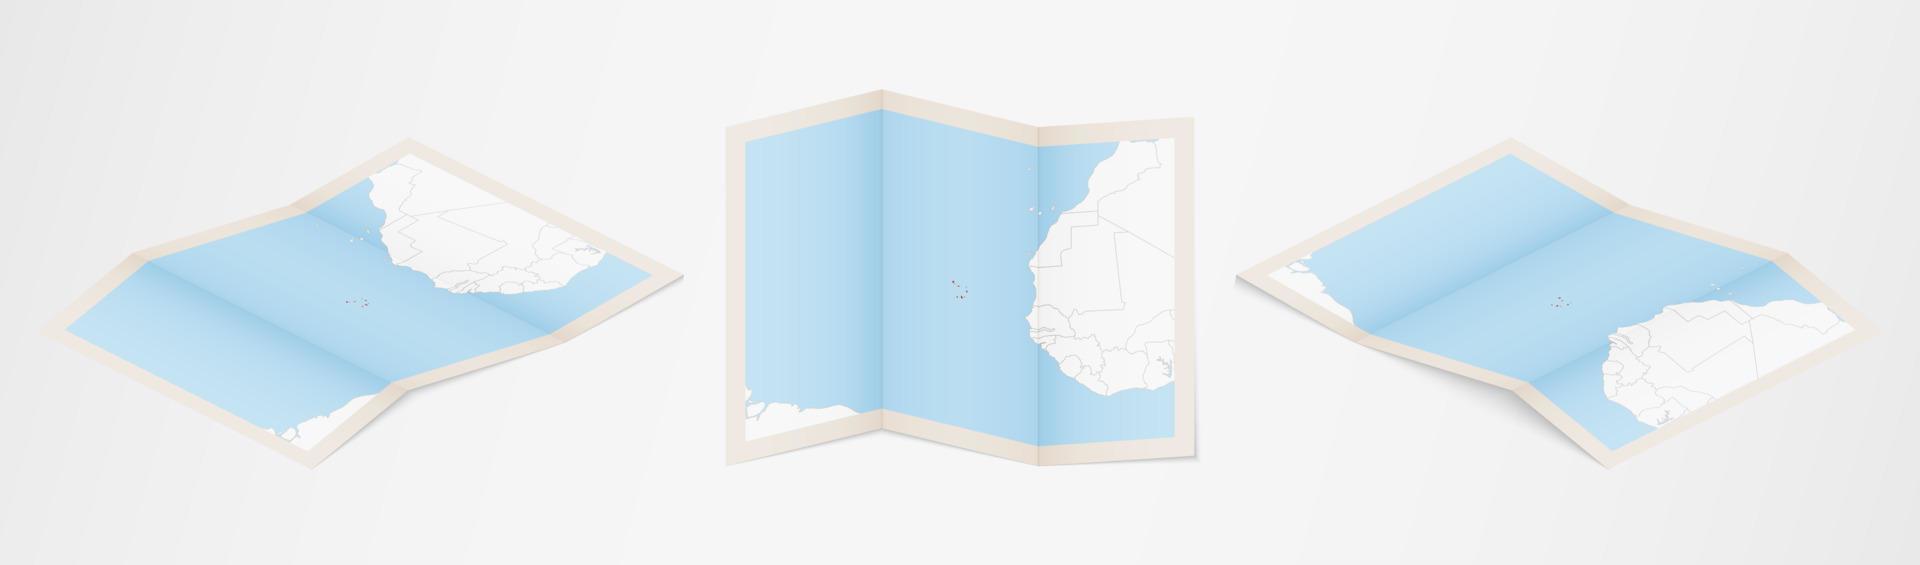 Folded map of Cape Verde in three different versions. vector